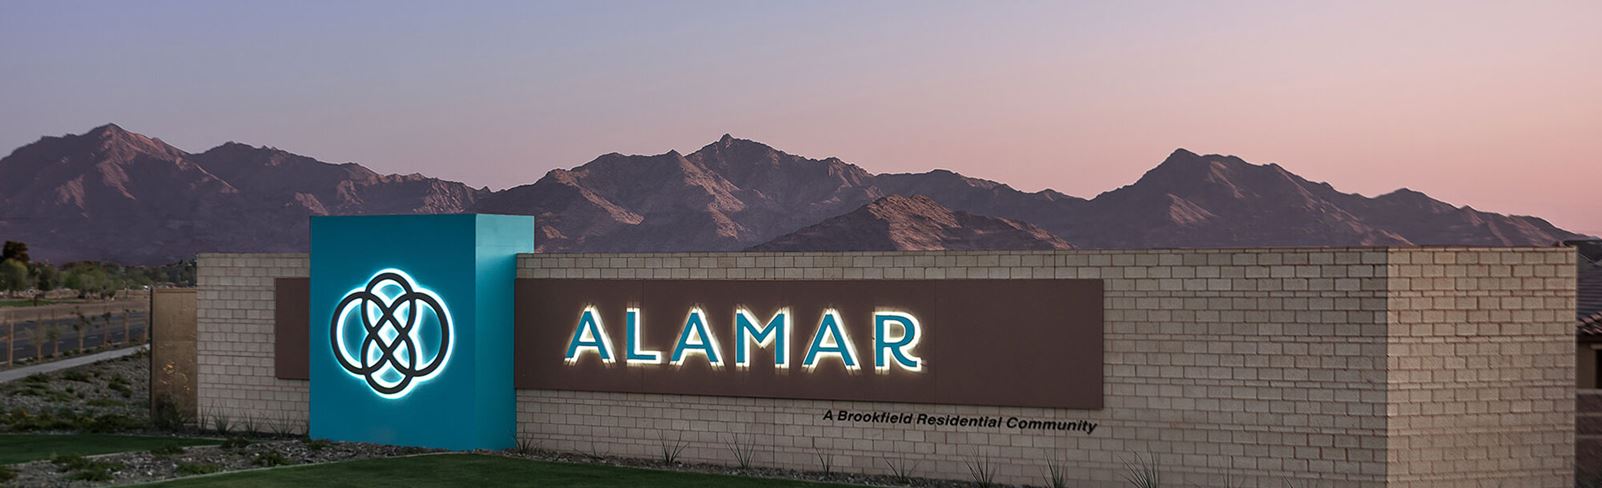 Entry monument for the Alamar community in Avondale, Arizona